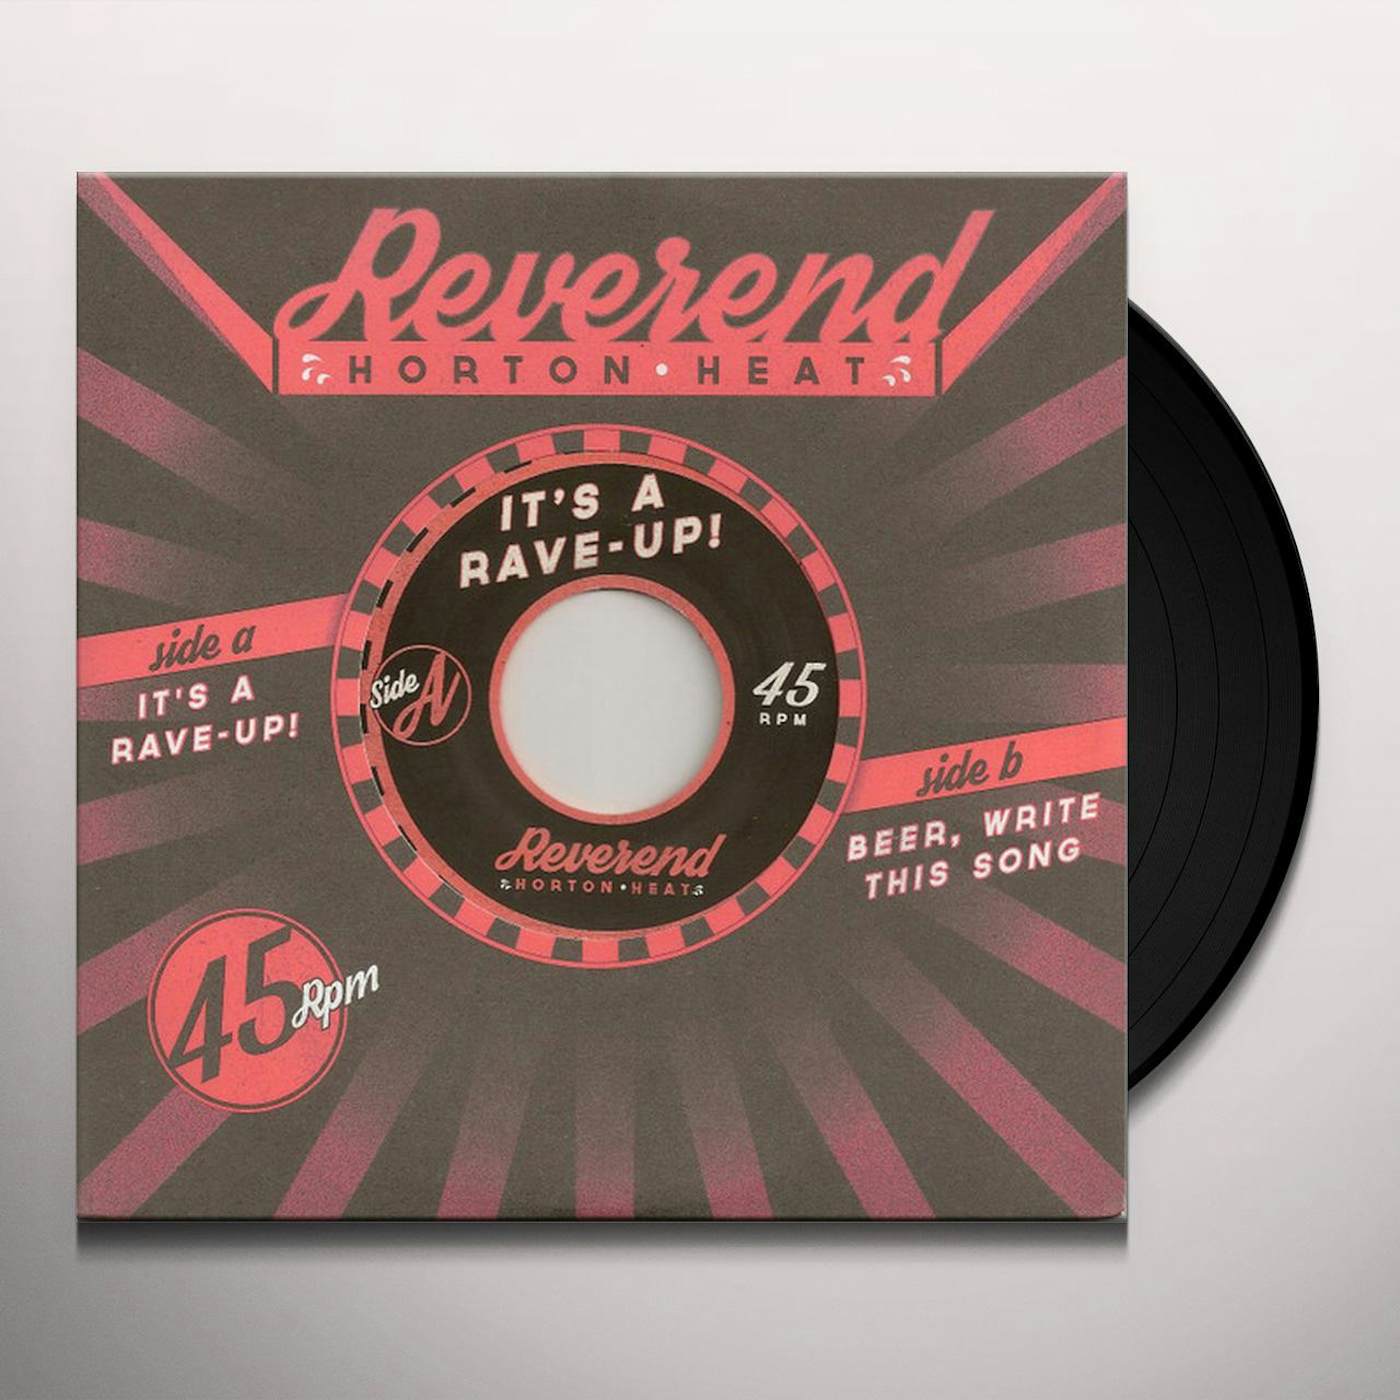 The Reverend Horton Heat It's A Rave-Up/Beer, Write This Song Vinyl Record